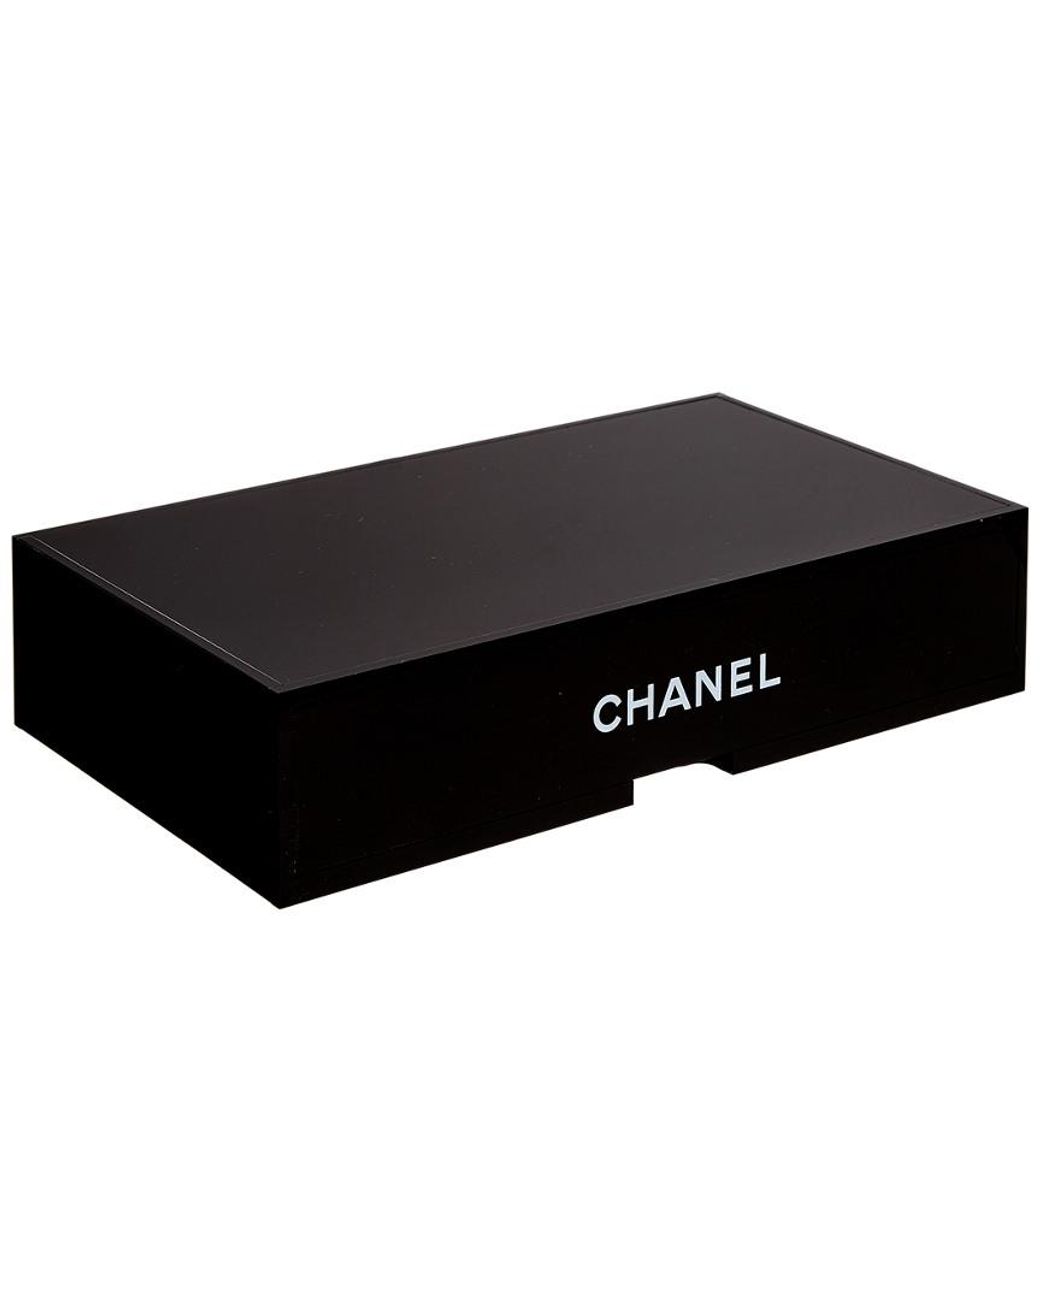 Chanel is upping the cleansing game  Silverkis World  Chanel beauty  Chanel Facial cleanser